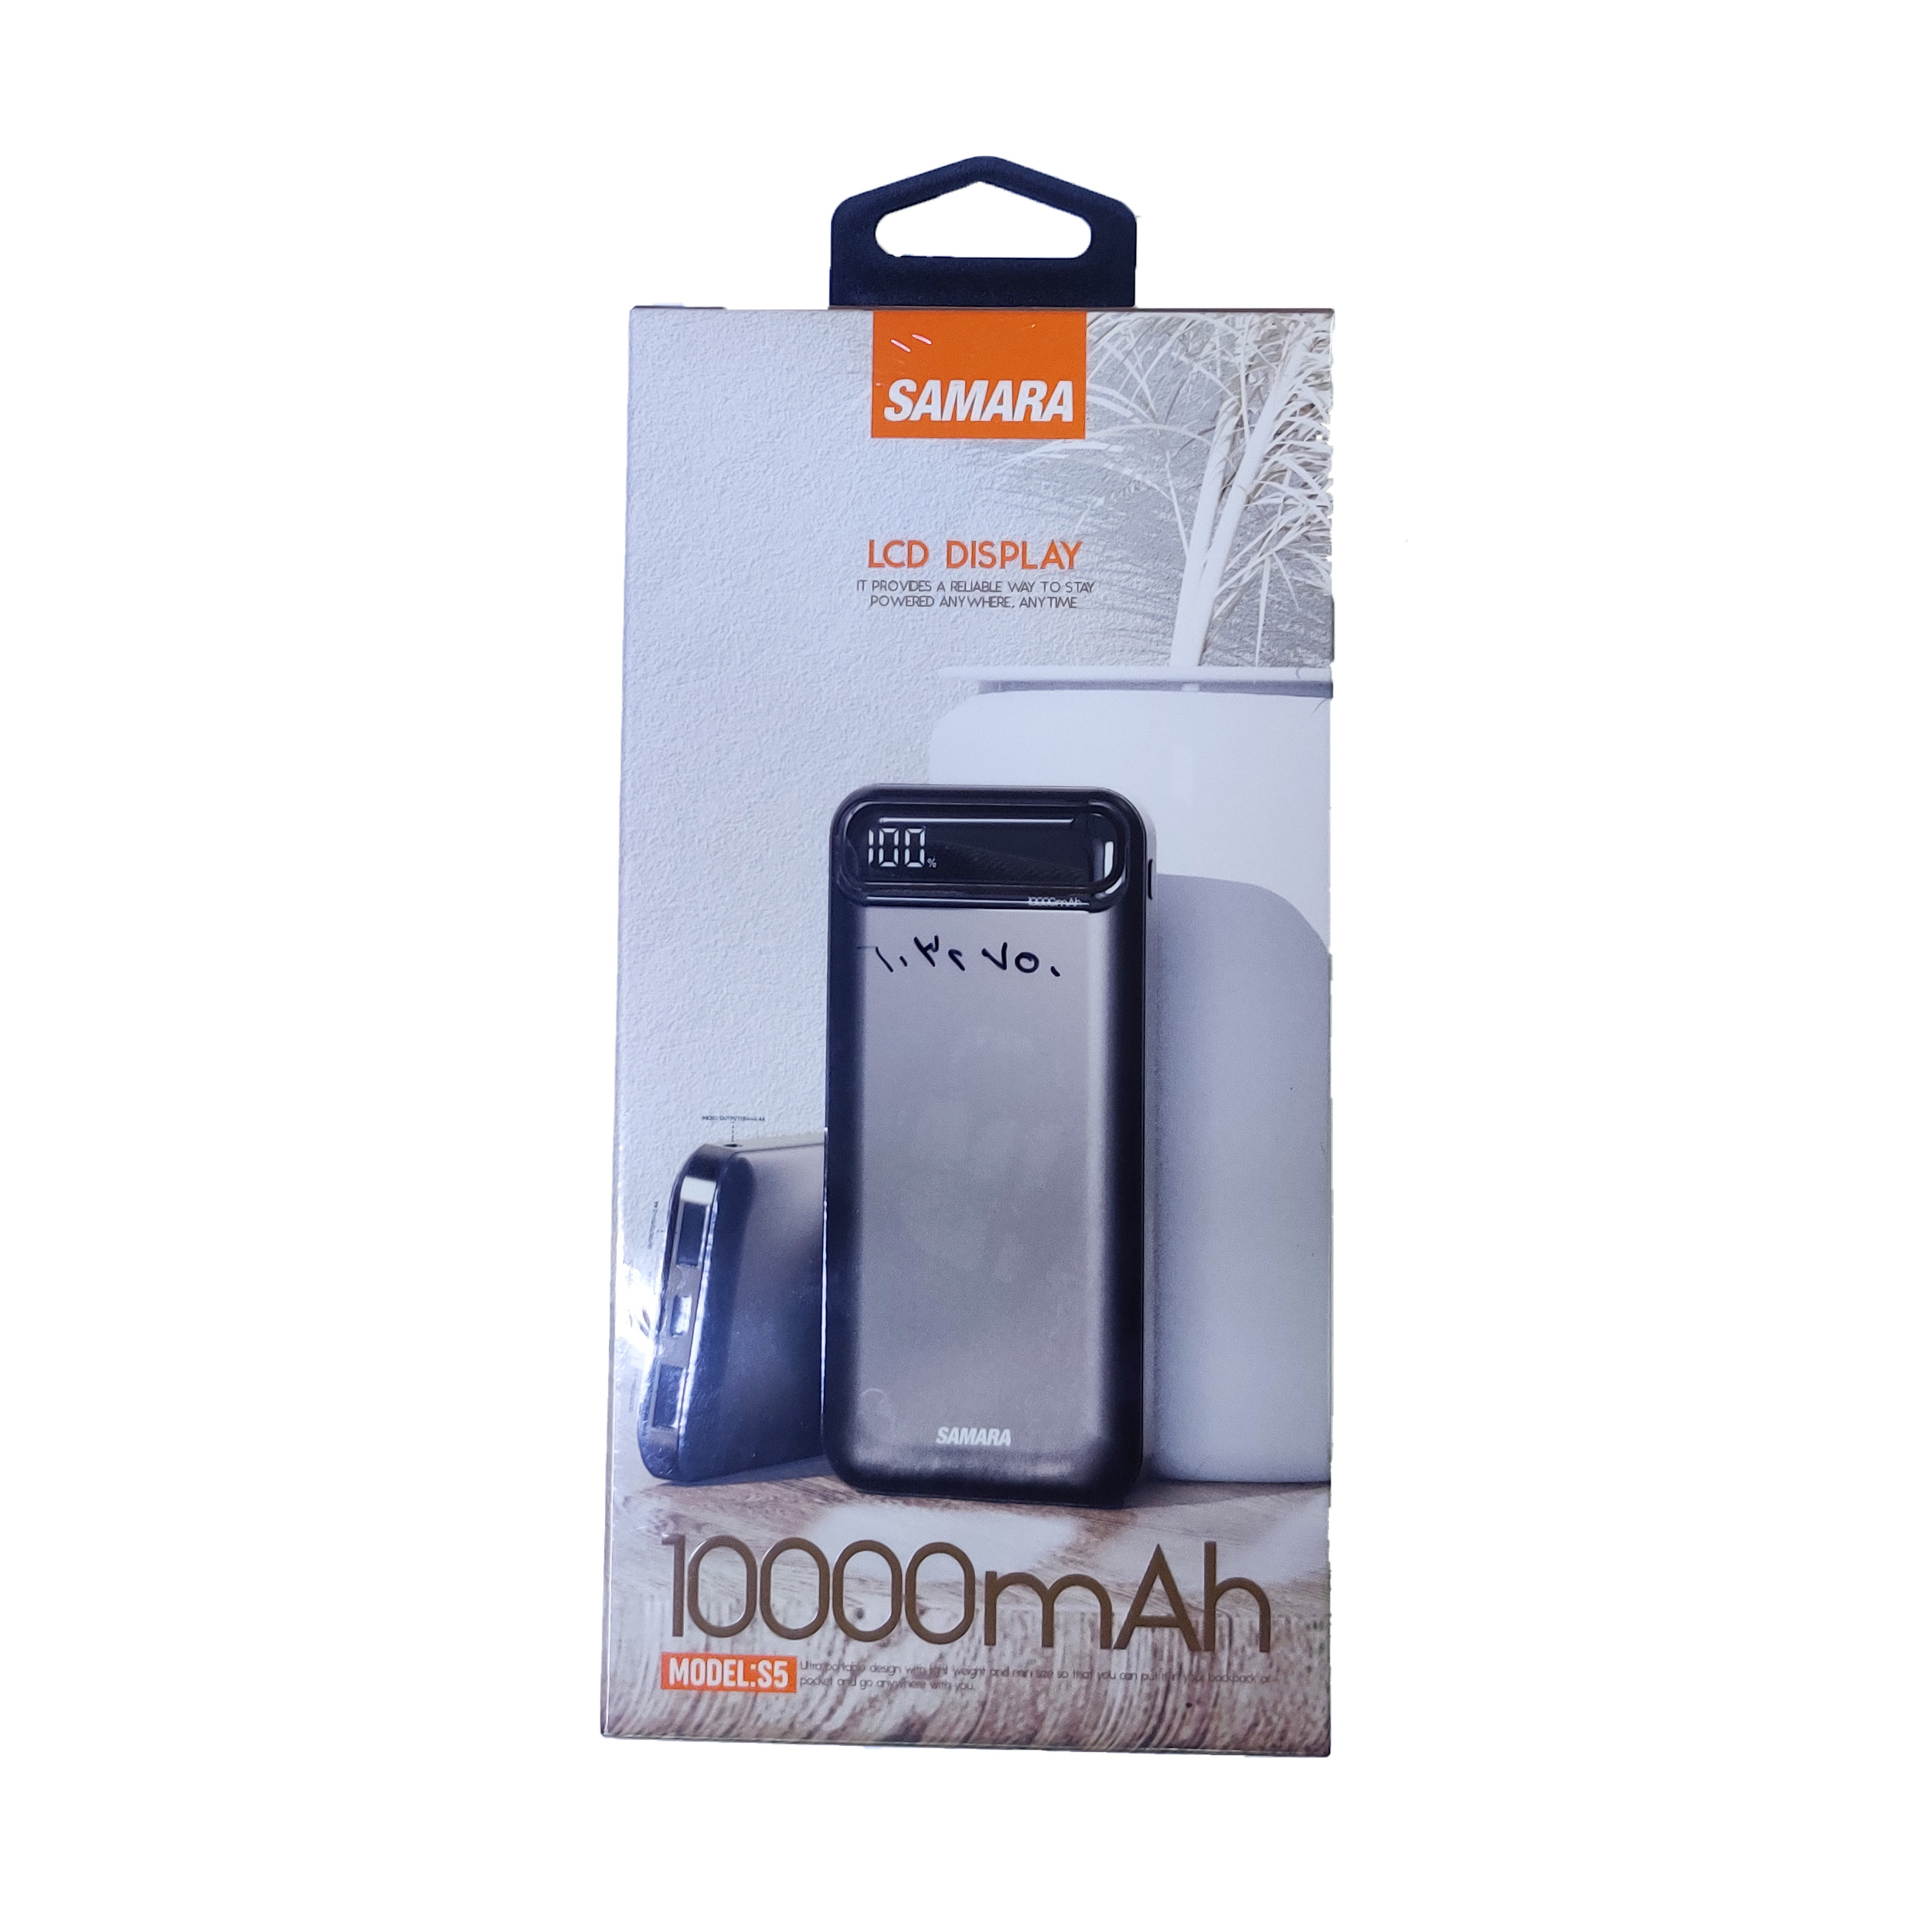 EXTERNAL BATTERY SAMARA 10000 MAH FOR SMART DEVICES POWER BANK WITH LCD S5 ,Smartphones & Tab Power Banks